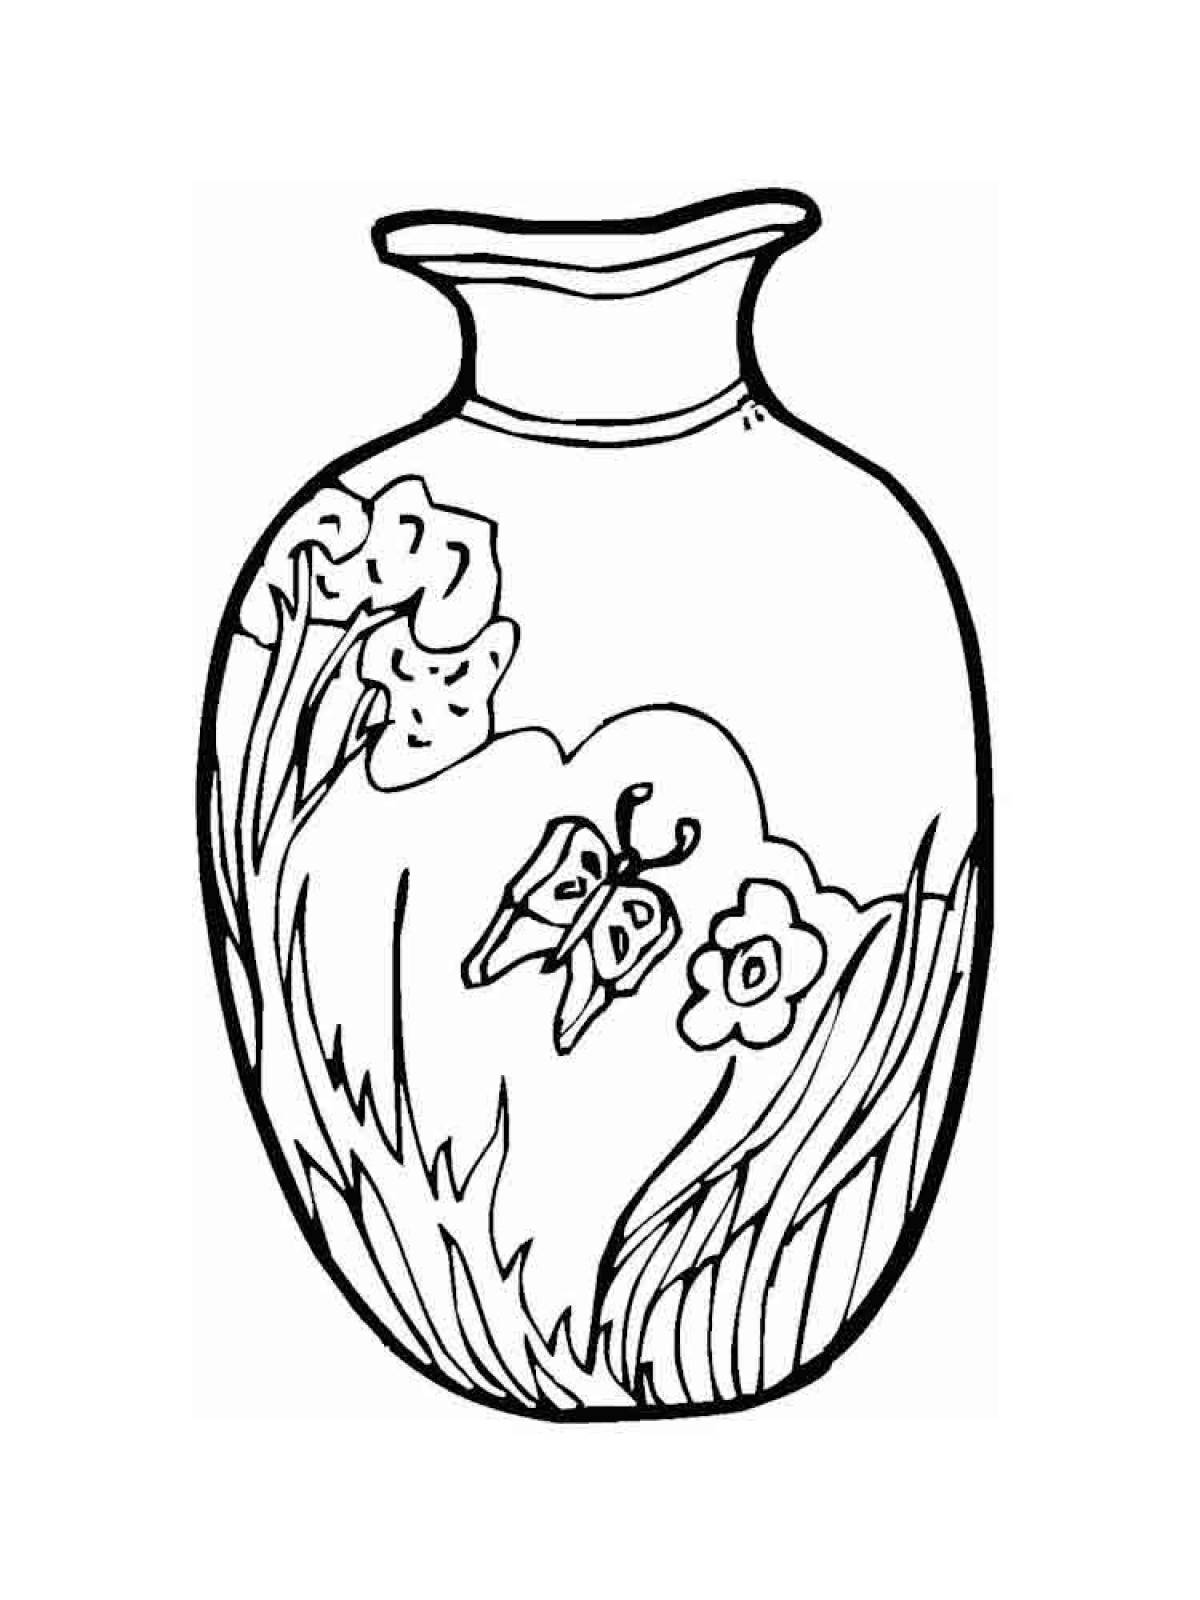 Vase with pattern